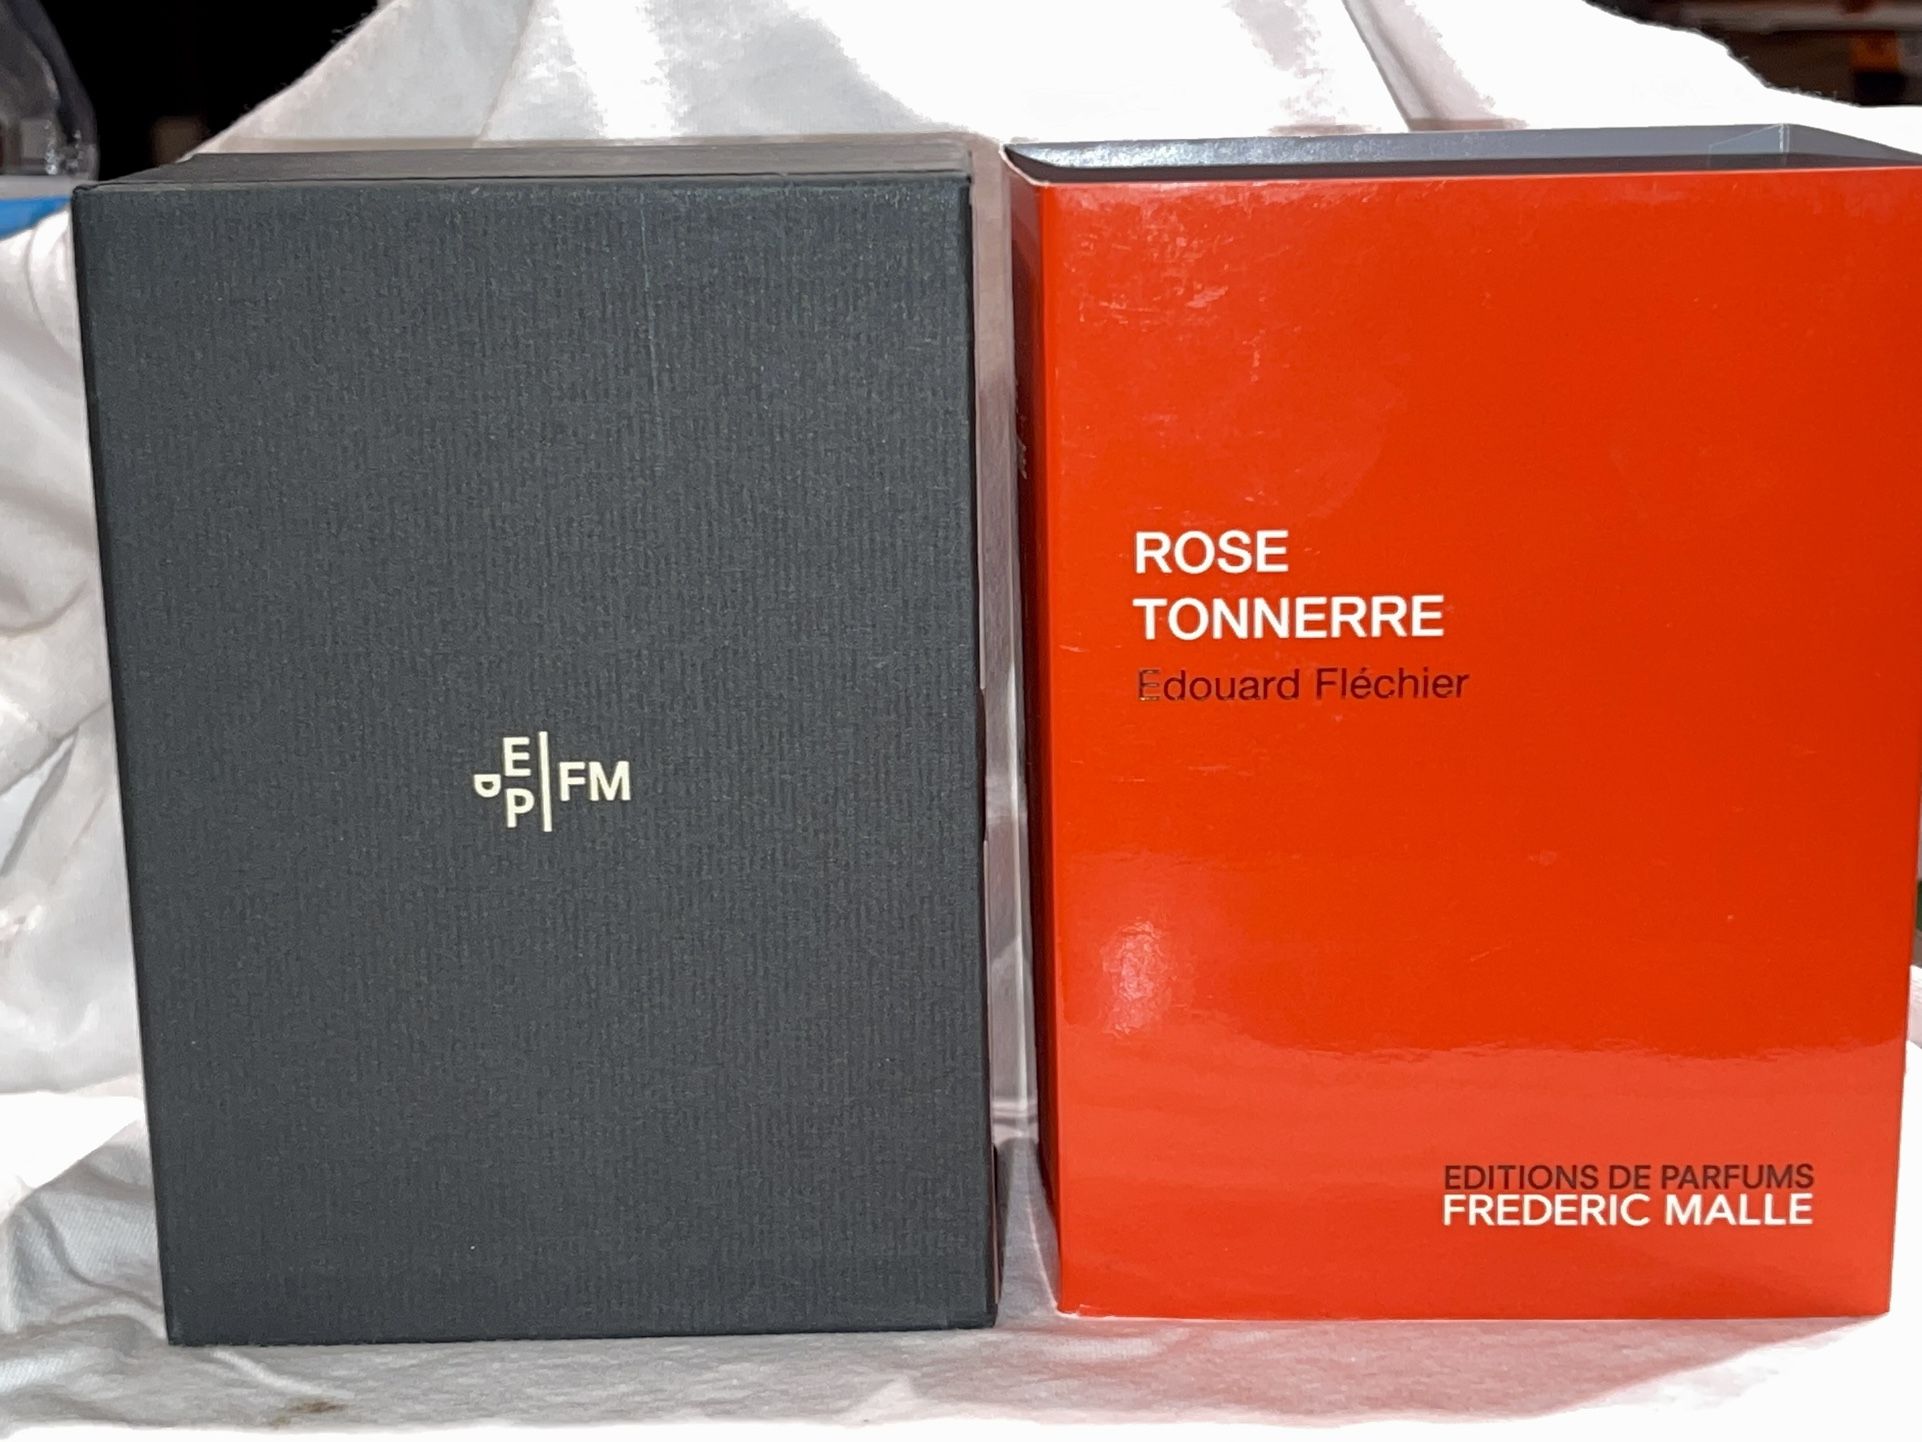 FREDERIC MALLE ROSE TONNERRE 3.4 Oz